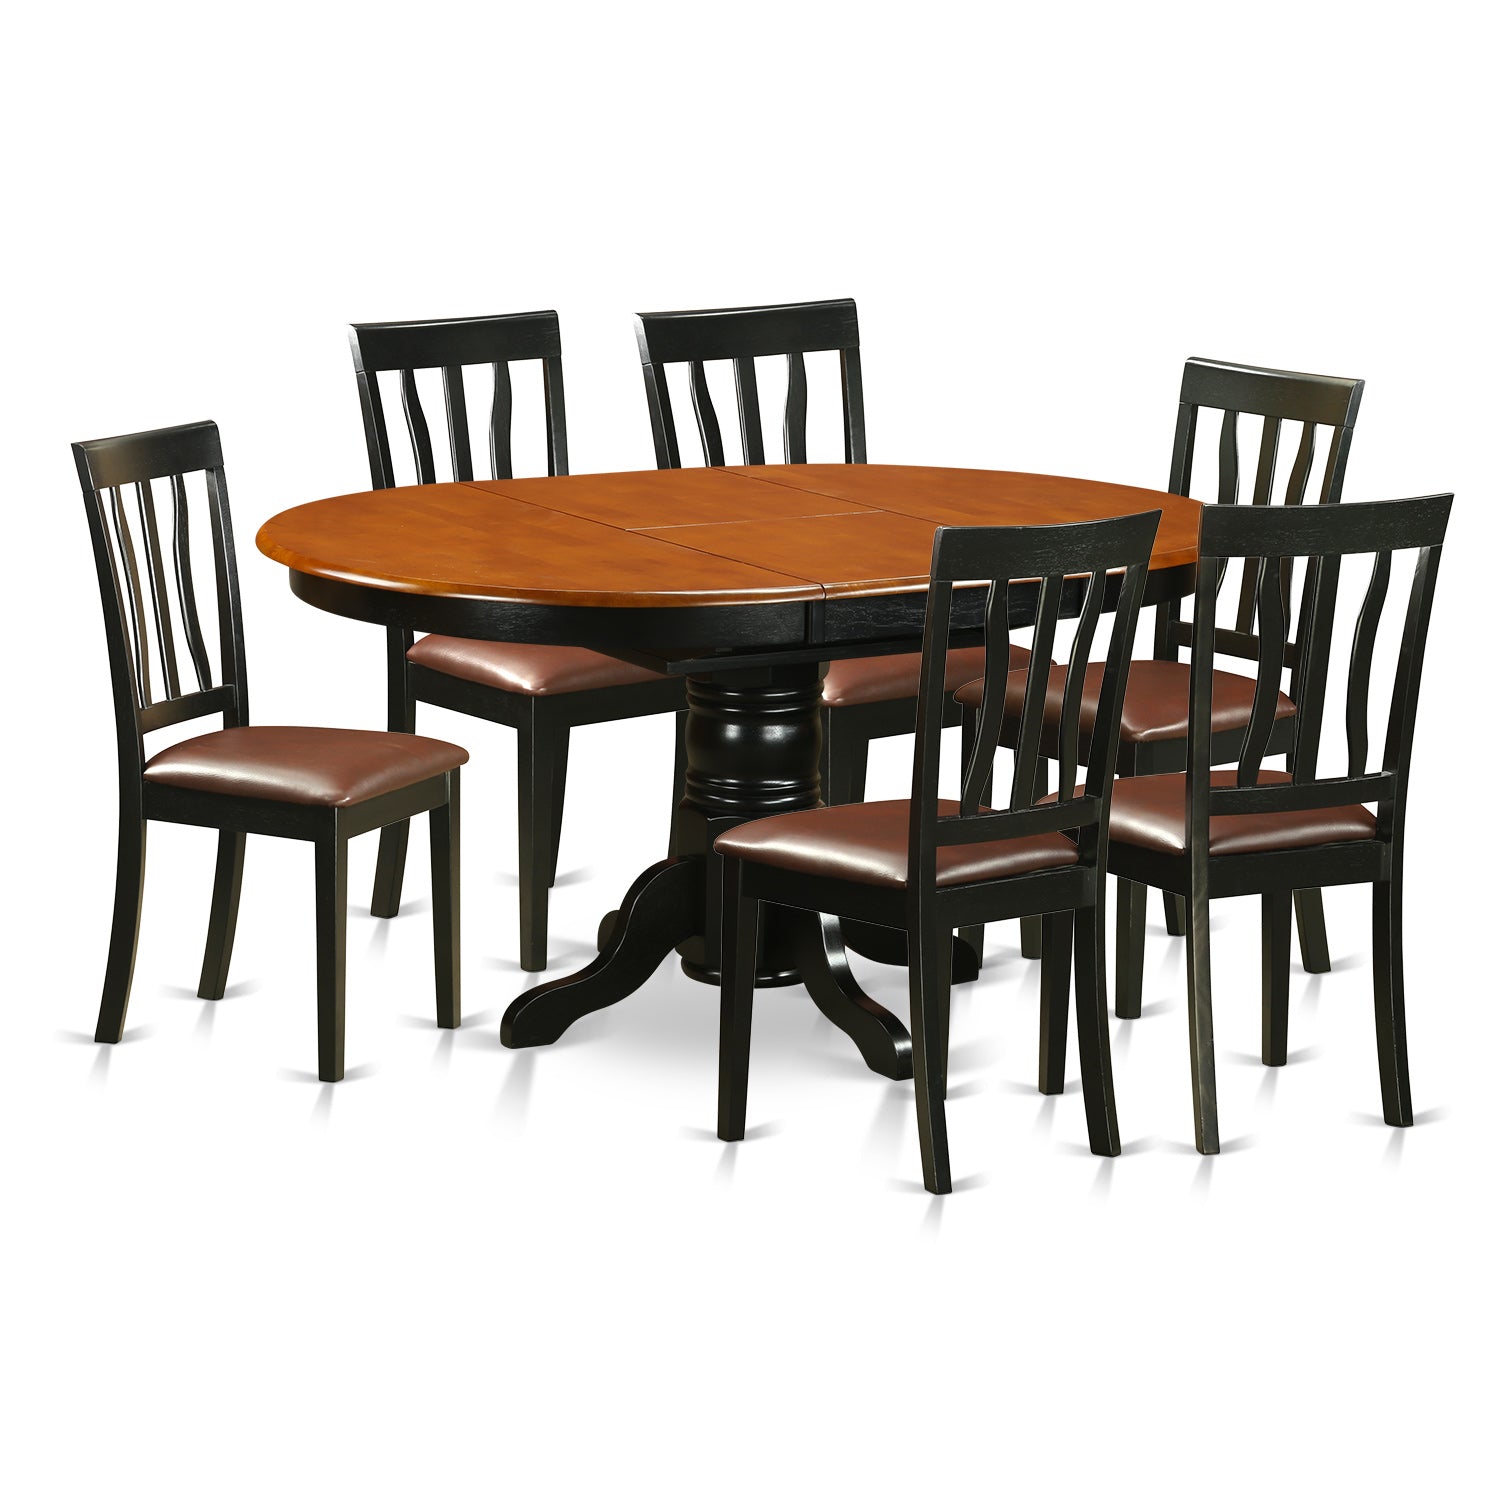 7 Pc Avon Kitchen Dining Room Table w/ leaf & 6 Chairs set In Black / Cherry